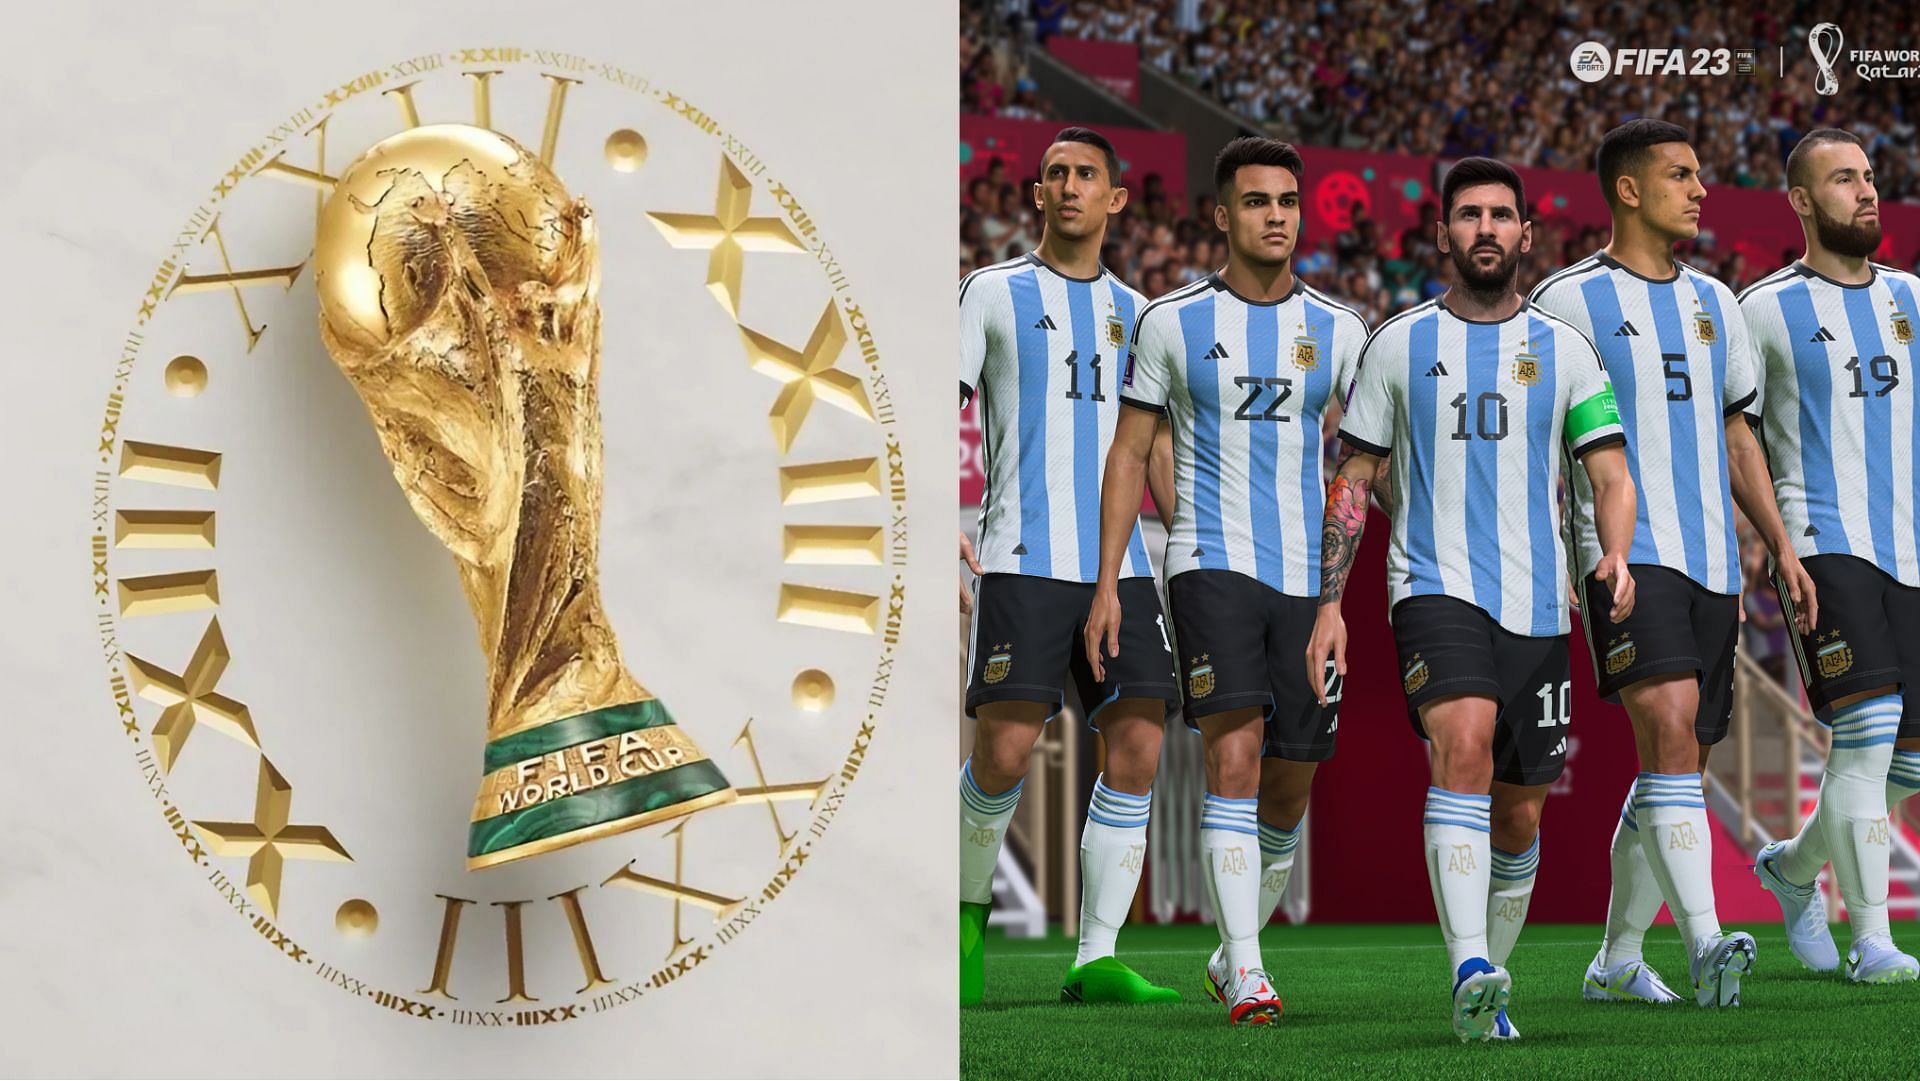 Who wins the World Cup 2022? FIFA 23 simulation predicts Messi and company as champions